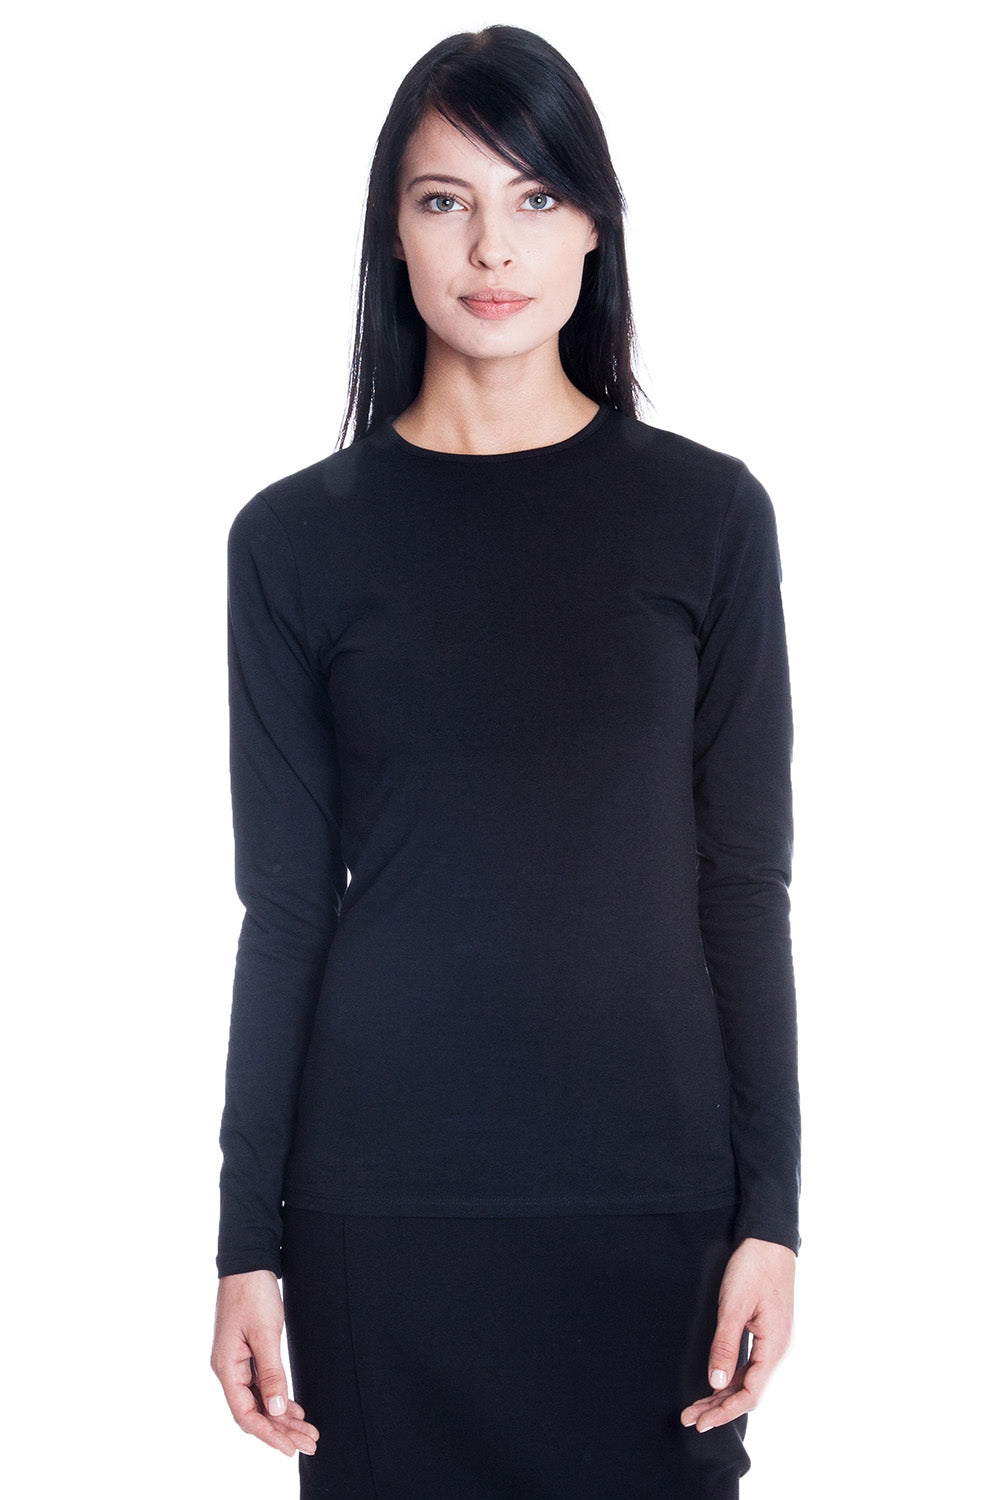 Esteez Long Sleeve Cotton Spandex RELAXED FIT Layering Shirt for